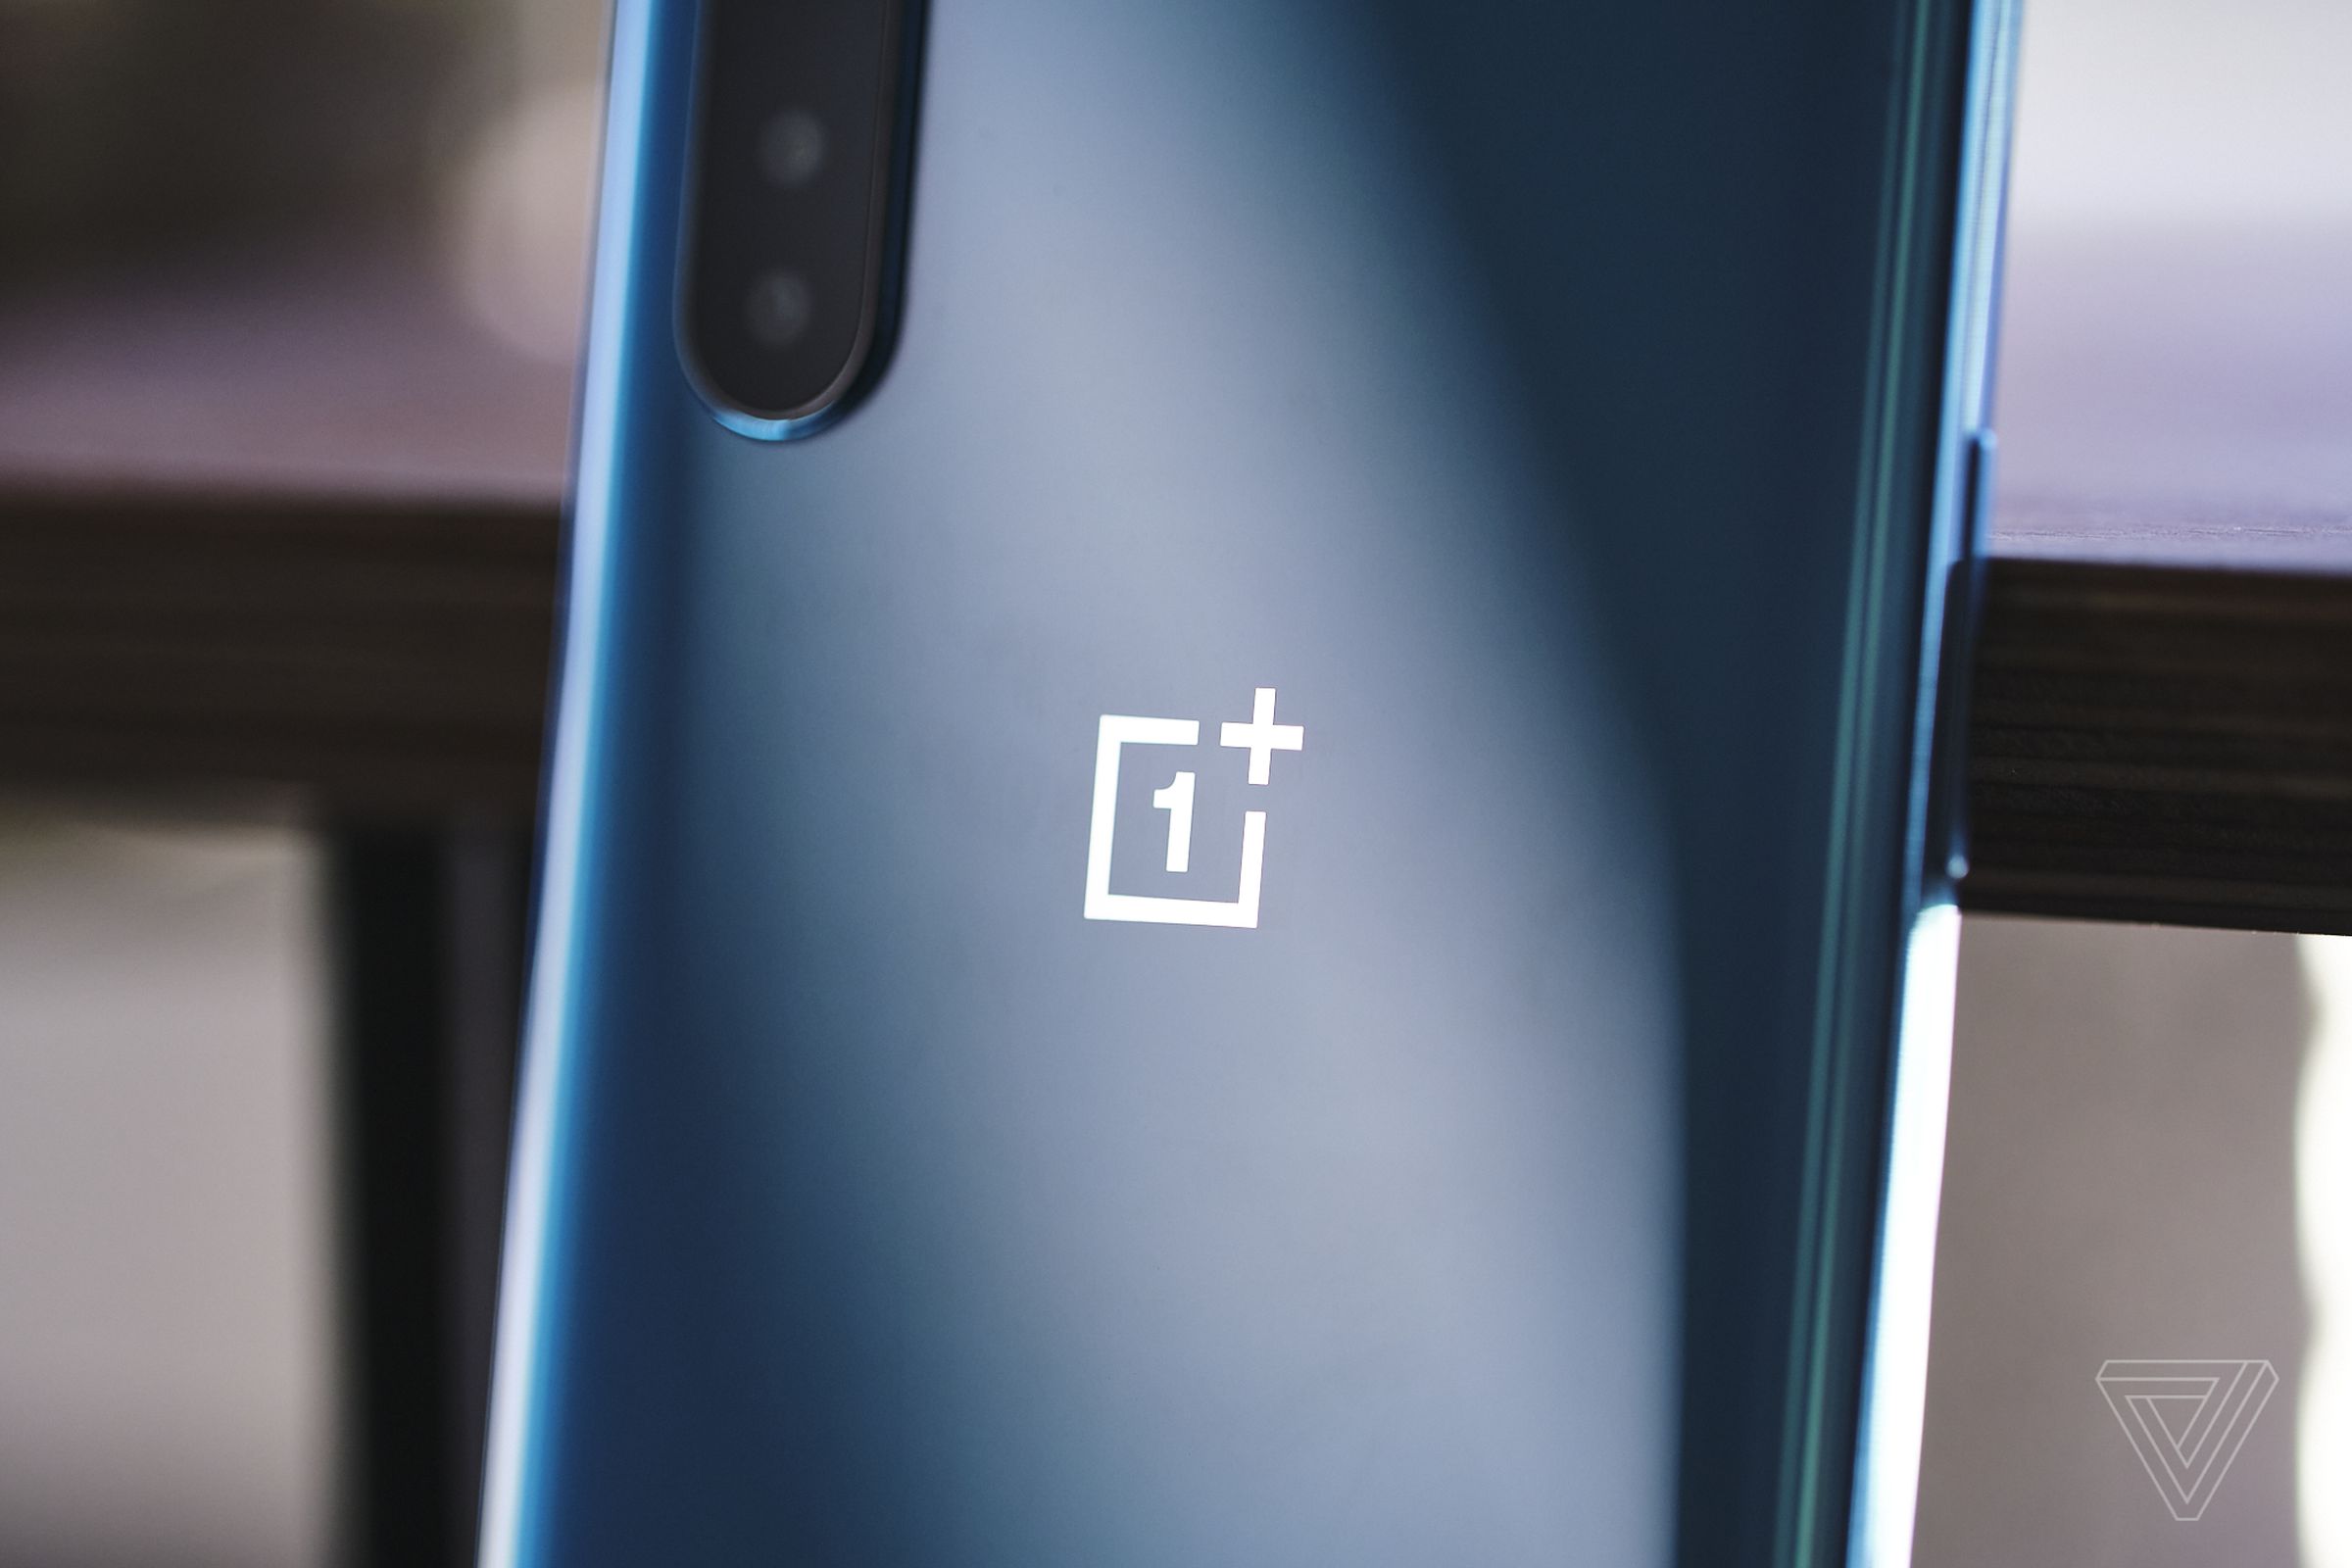 OnePlus released the mid-range Nord (pictured) earlier this year. 